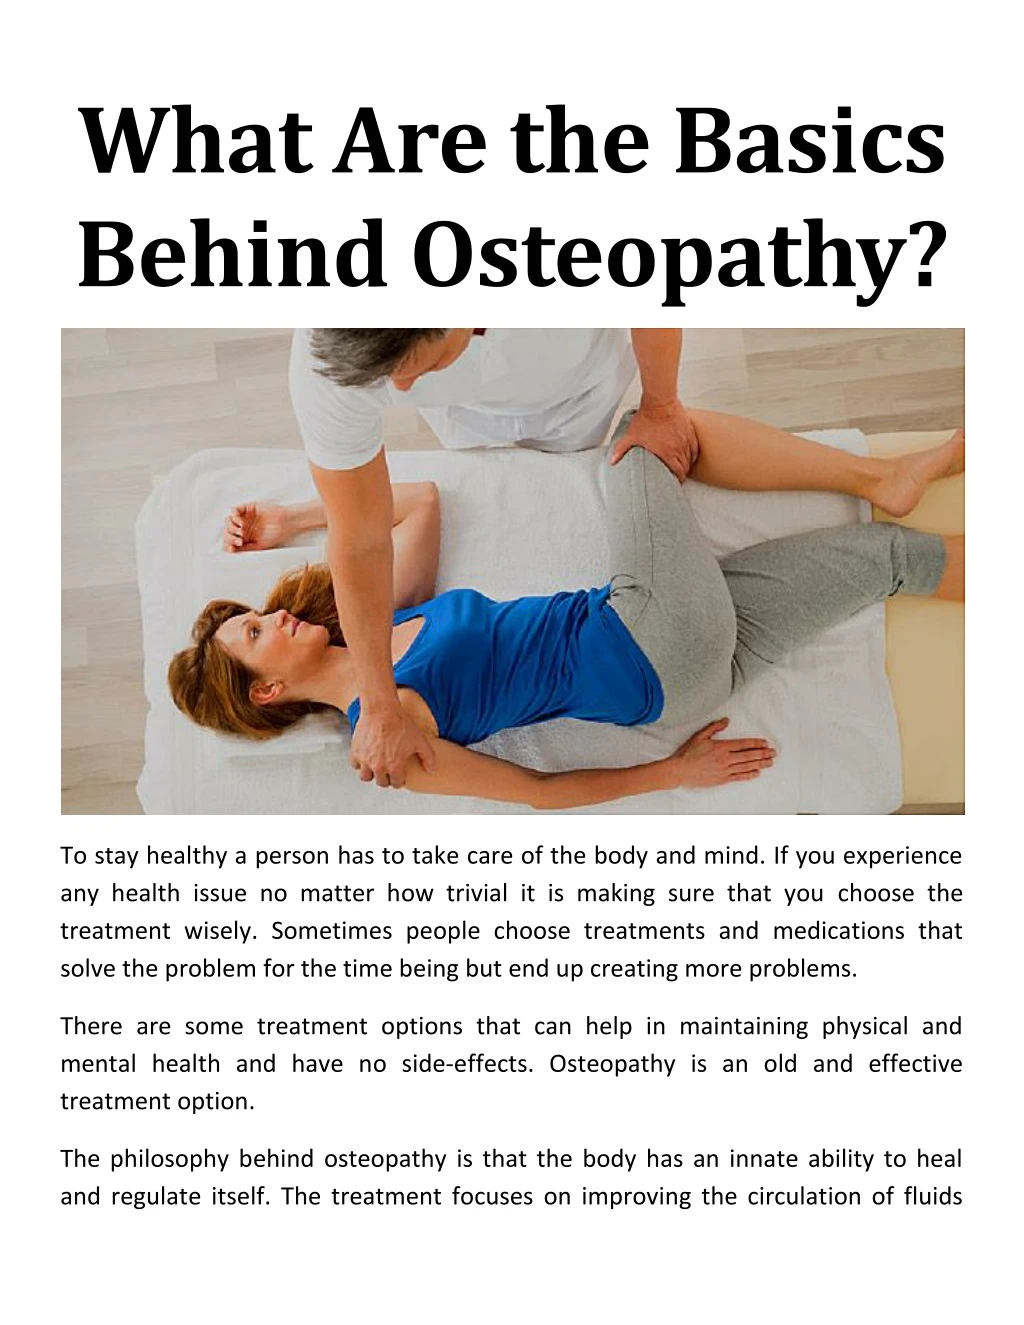 what are the basics behind osteopathy